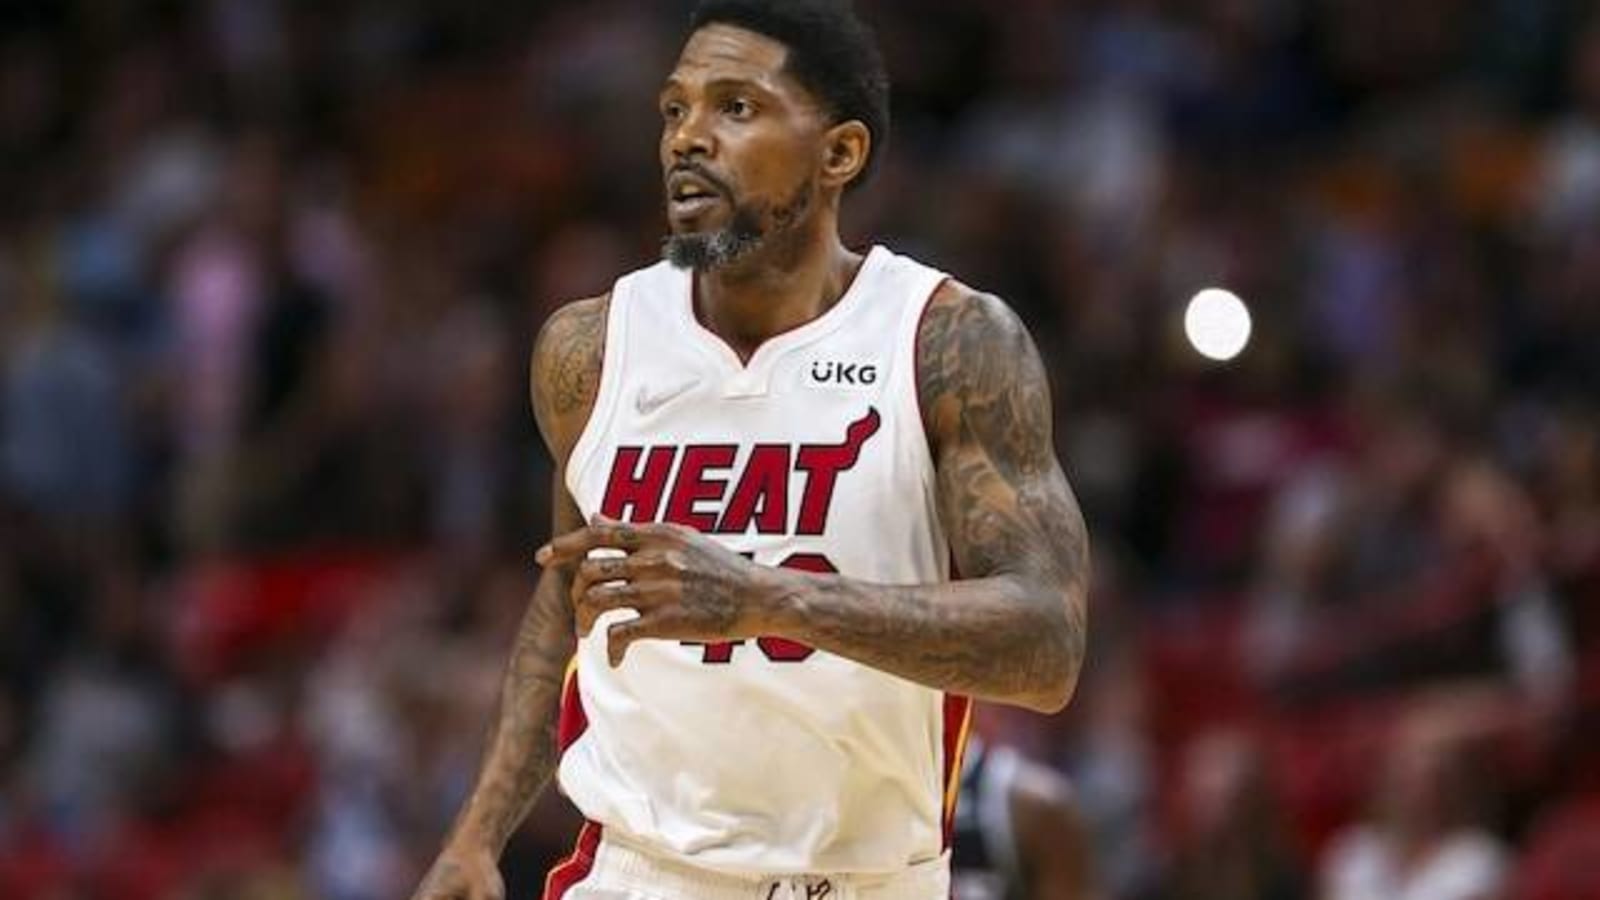 Heat’s Udonis Haslem Joins Lakers’ Kobe Bryant & Mavericks’ Dirk Nowitzki As Only Players To Play 20 Seasons With One Team